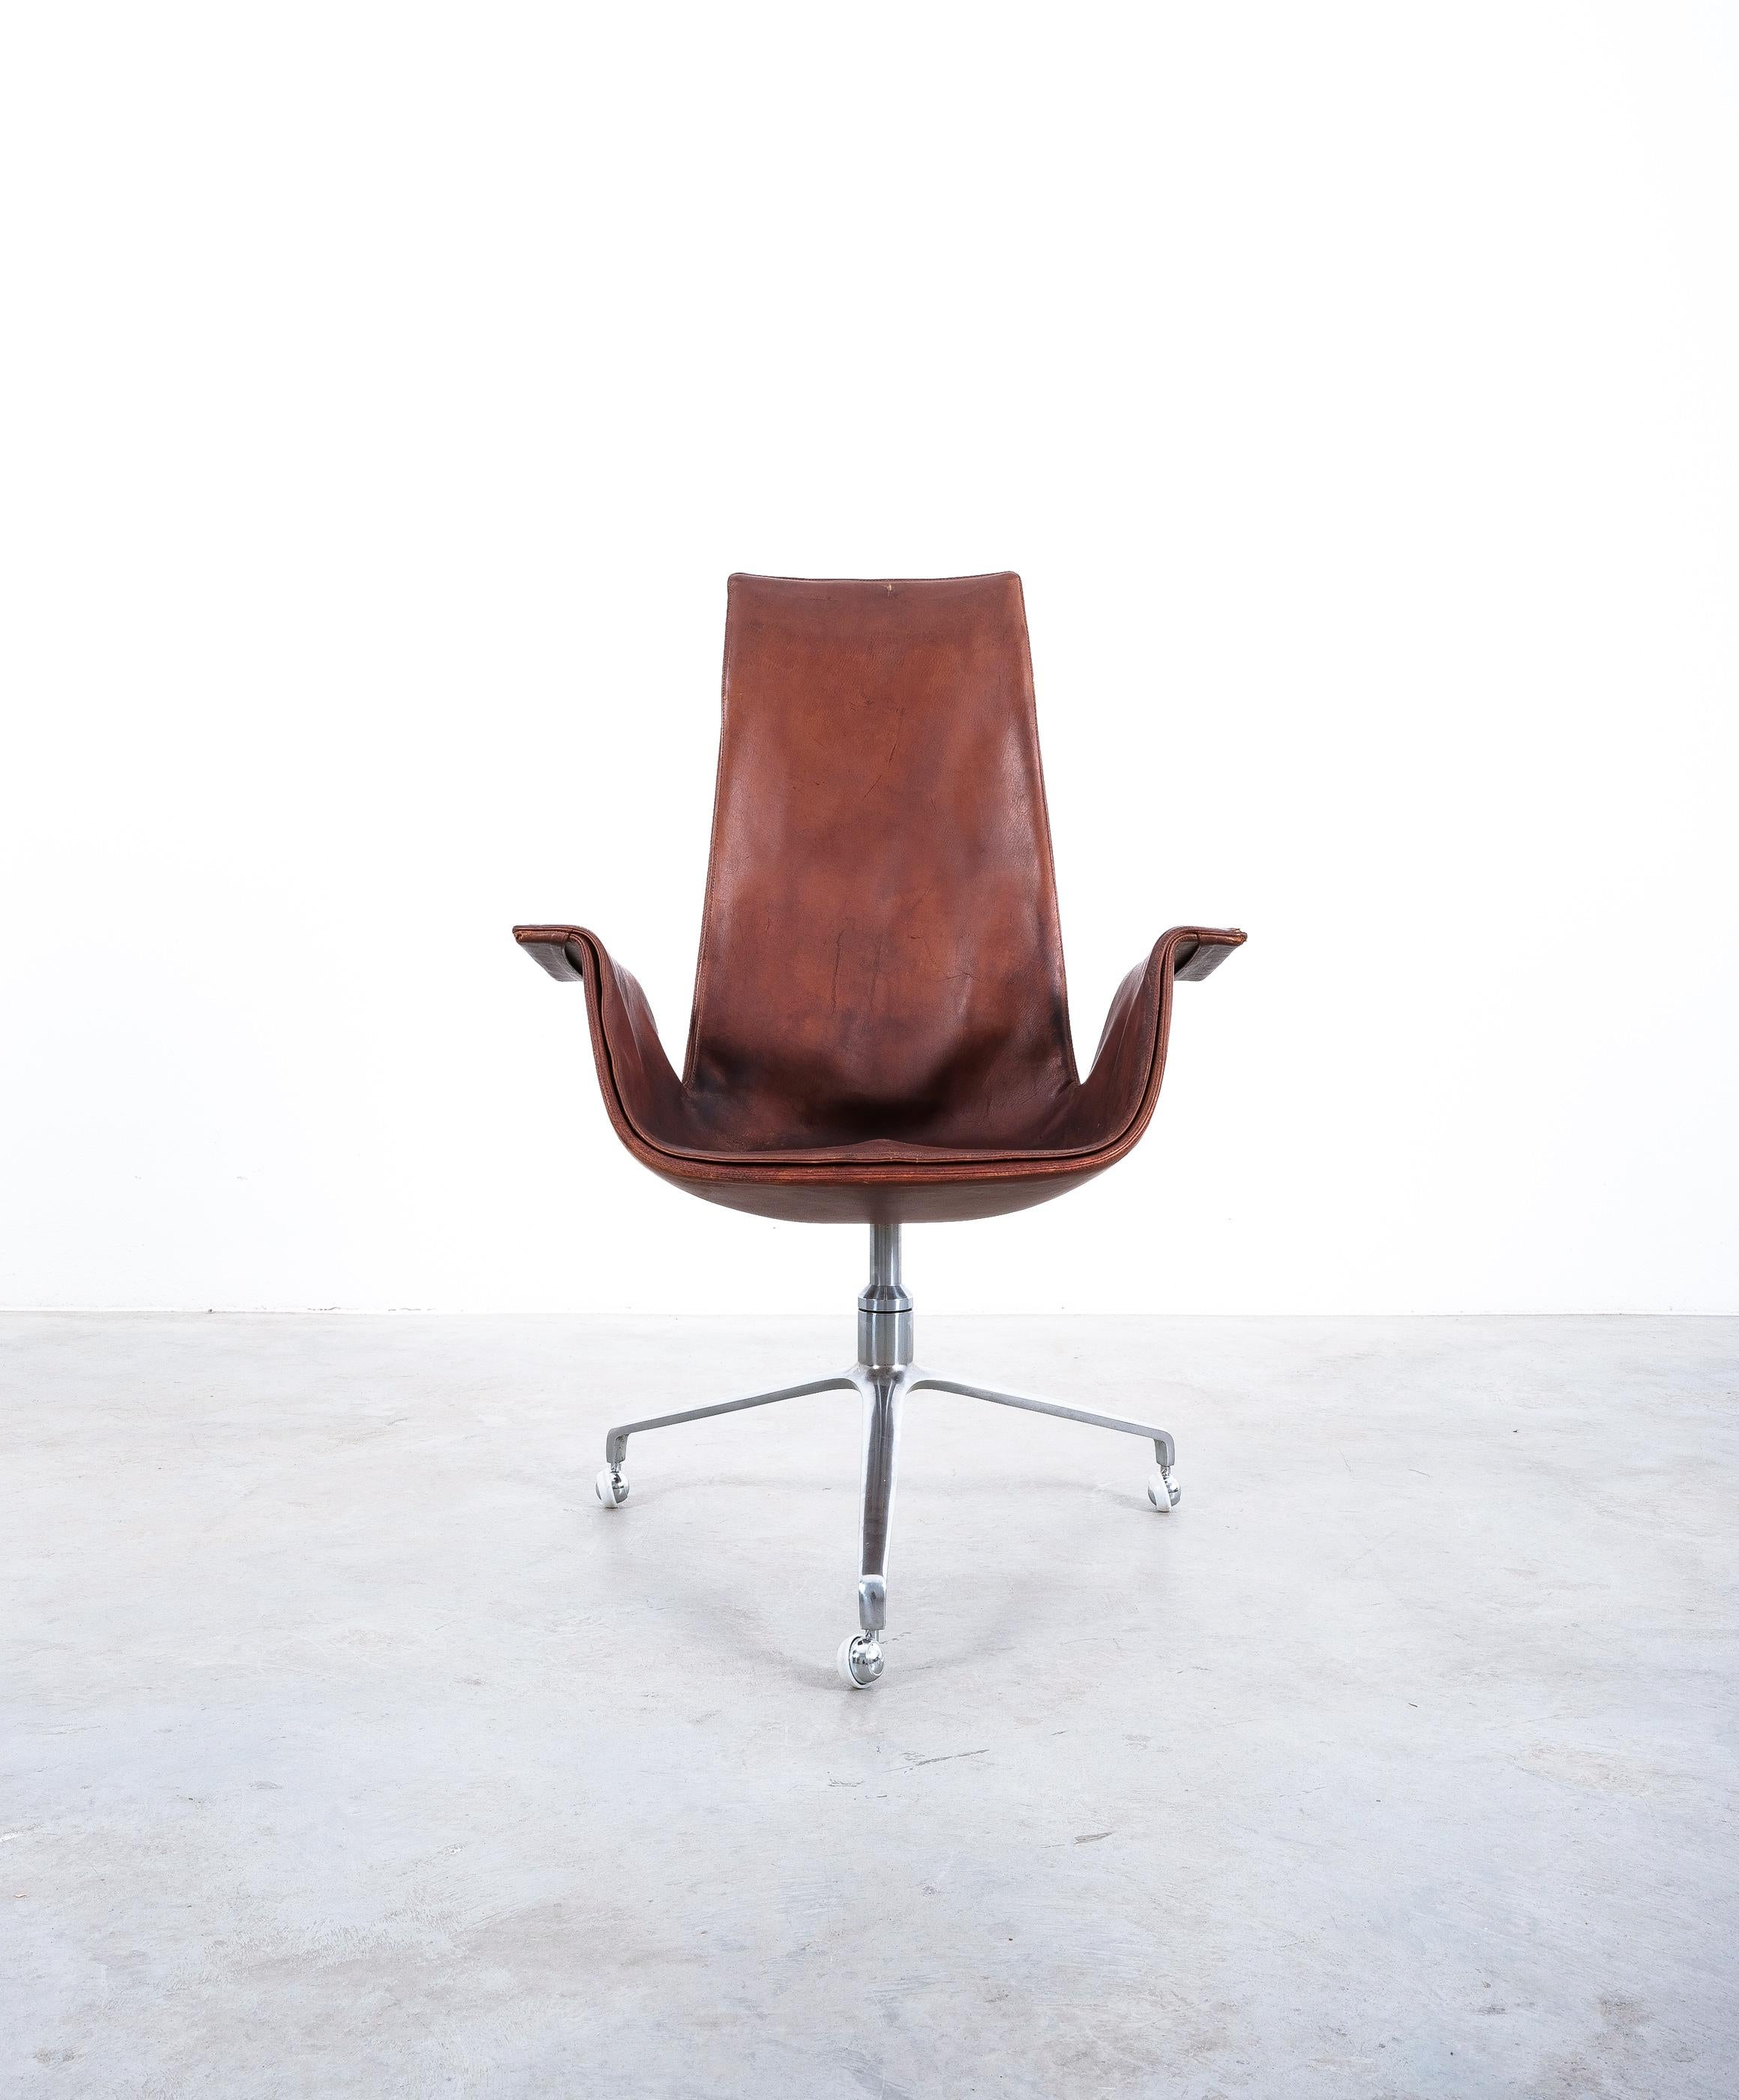 1964 brown leather